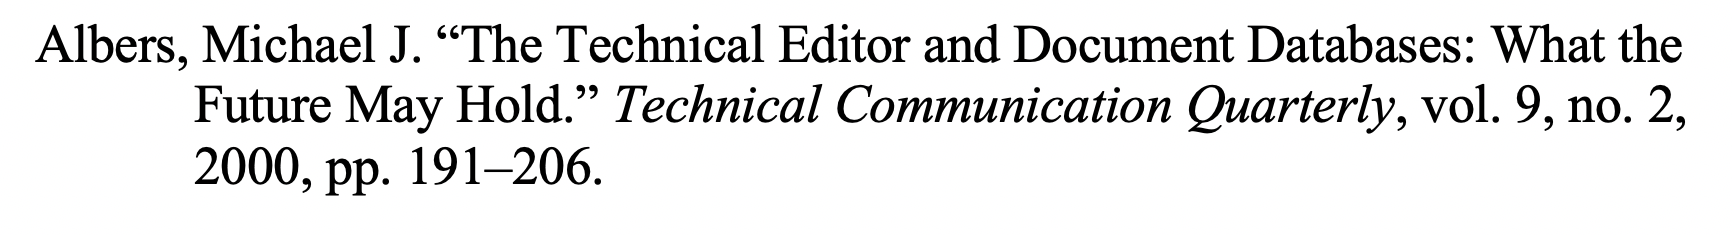 Text in hanging-indented paragraph: "Albers, Michael J. ‘The Technical Editor and Document Databases: What the Future May Hold.’ Technical Communication Quarterly. 9.2 (2000): 191–206."